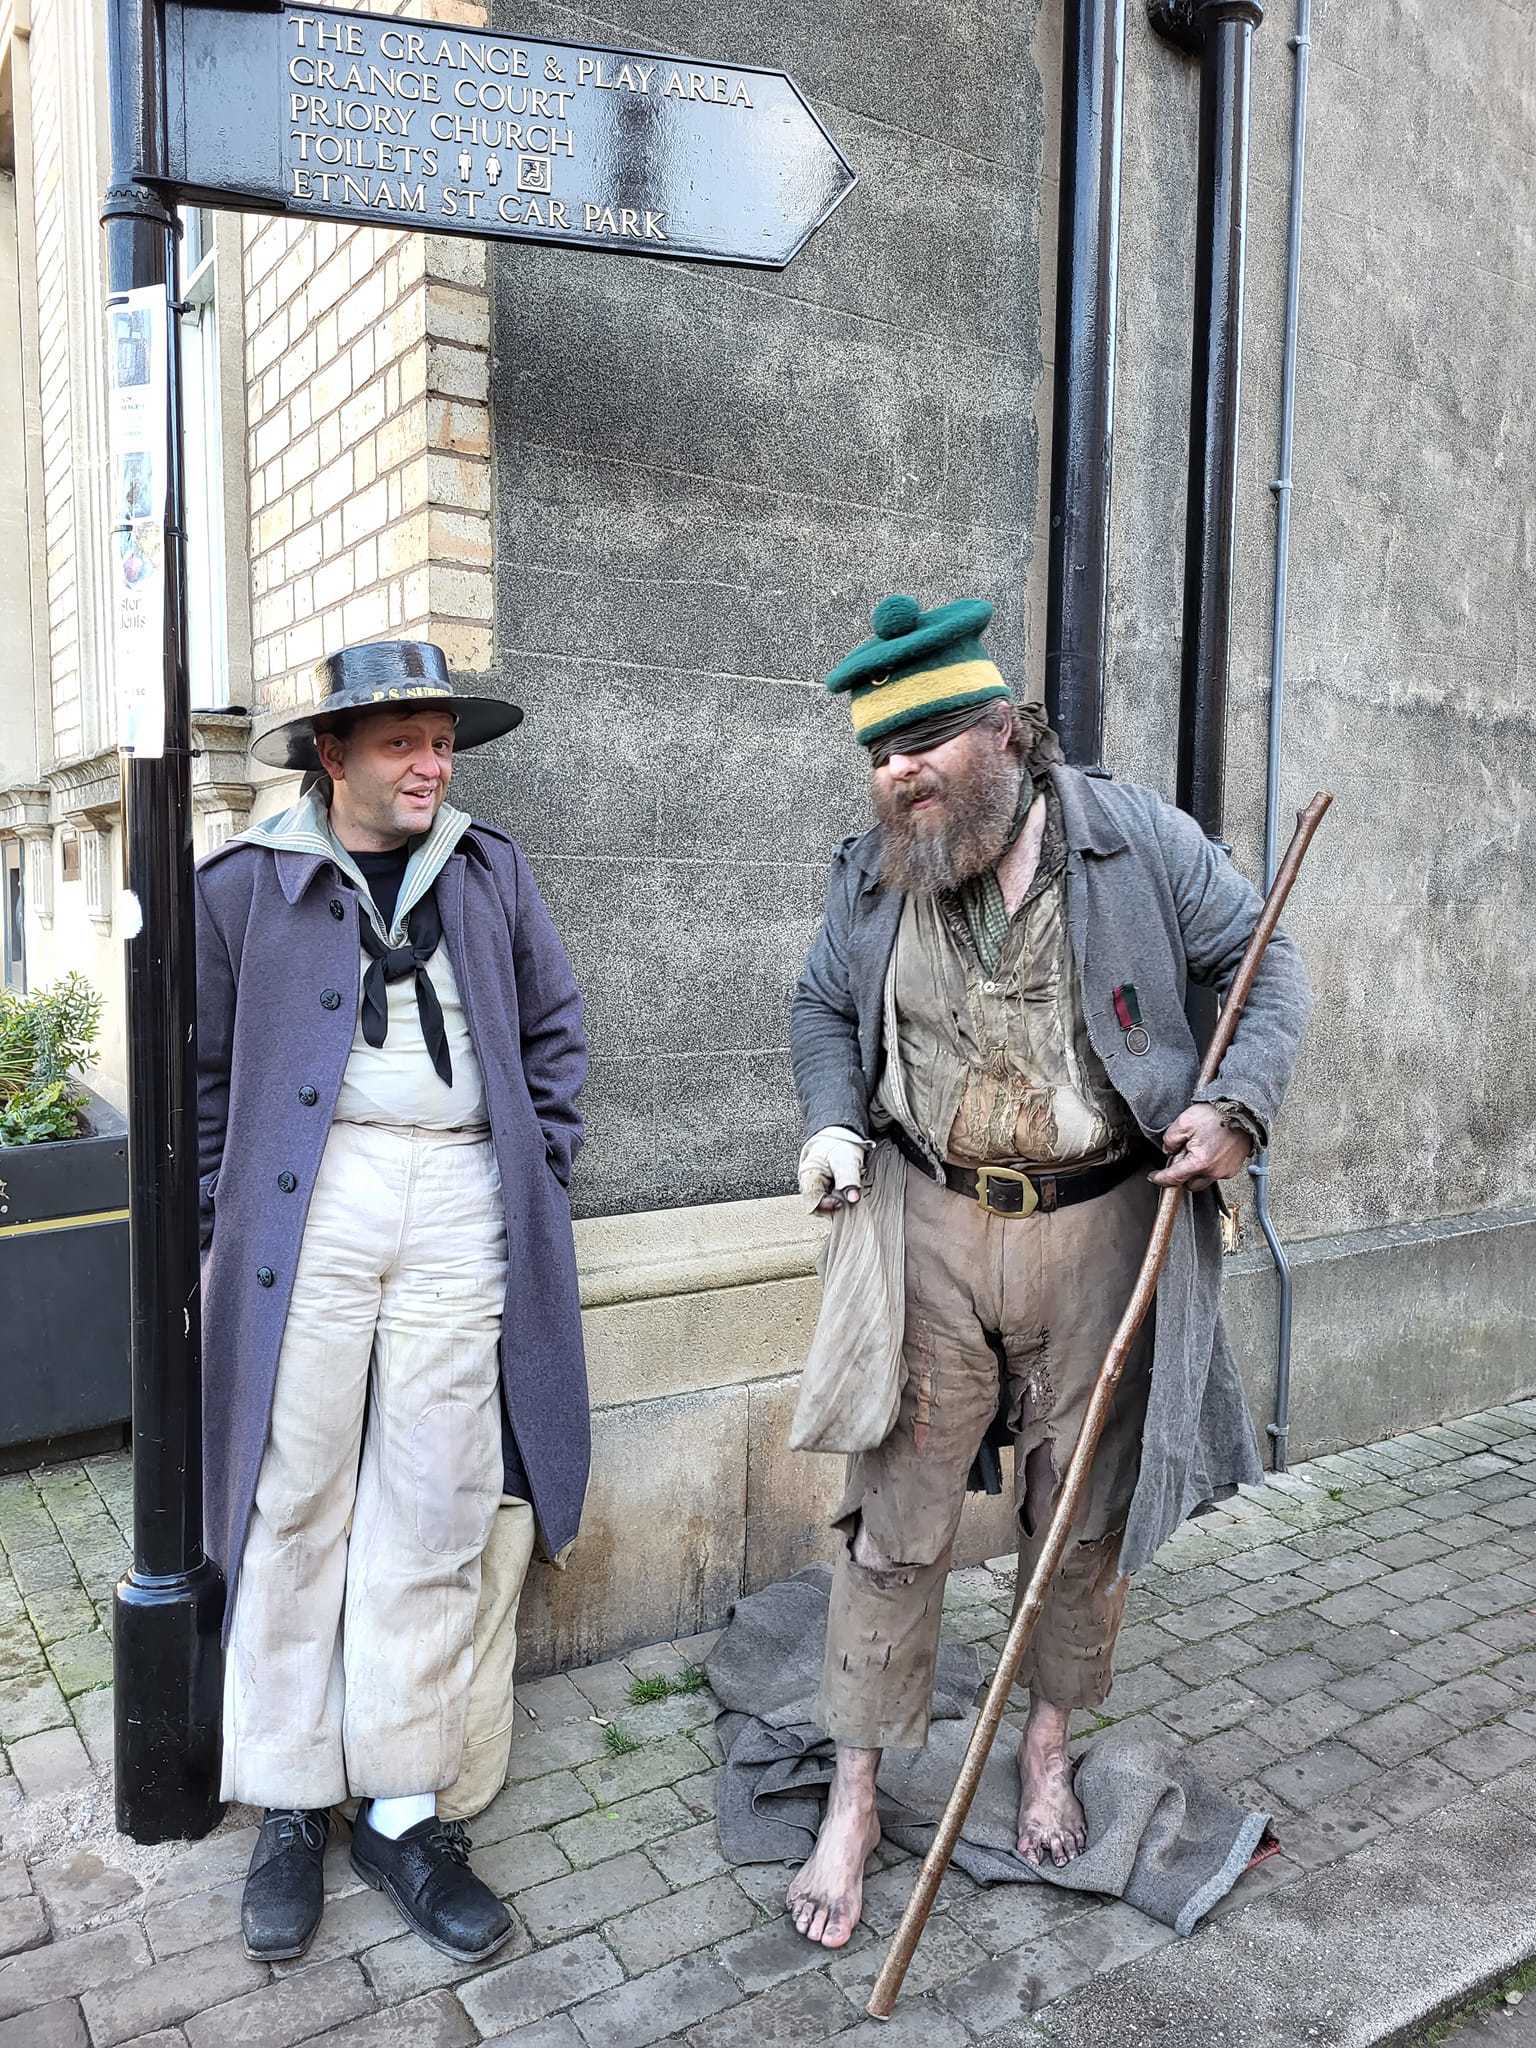 All walks of Victorian life were on show, from rich to poor. Picture: Virginie Alexandra Jacquet/Hereford Times Camera Club